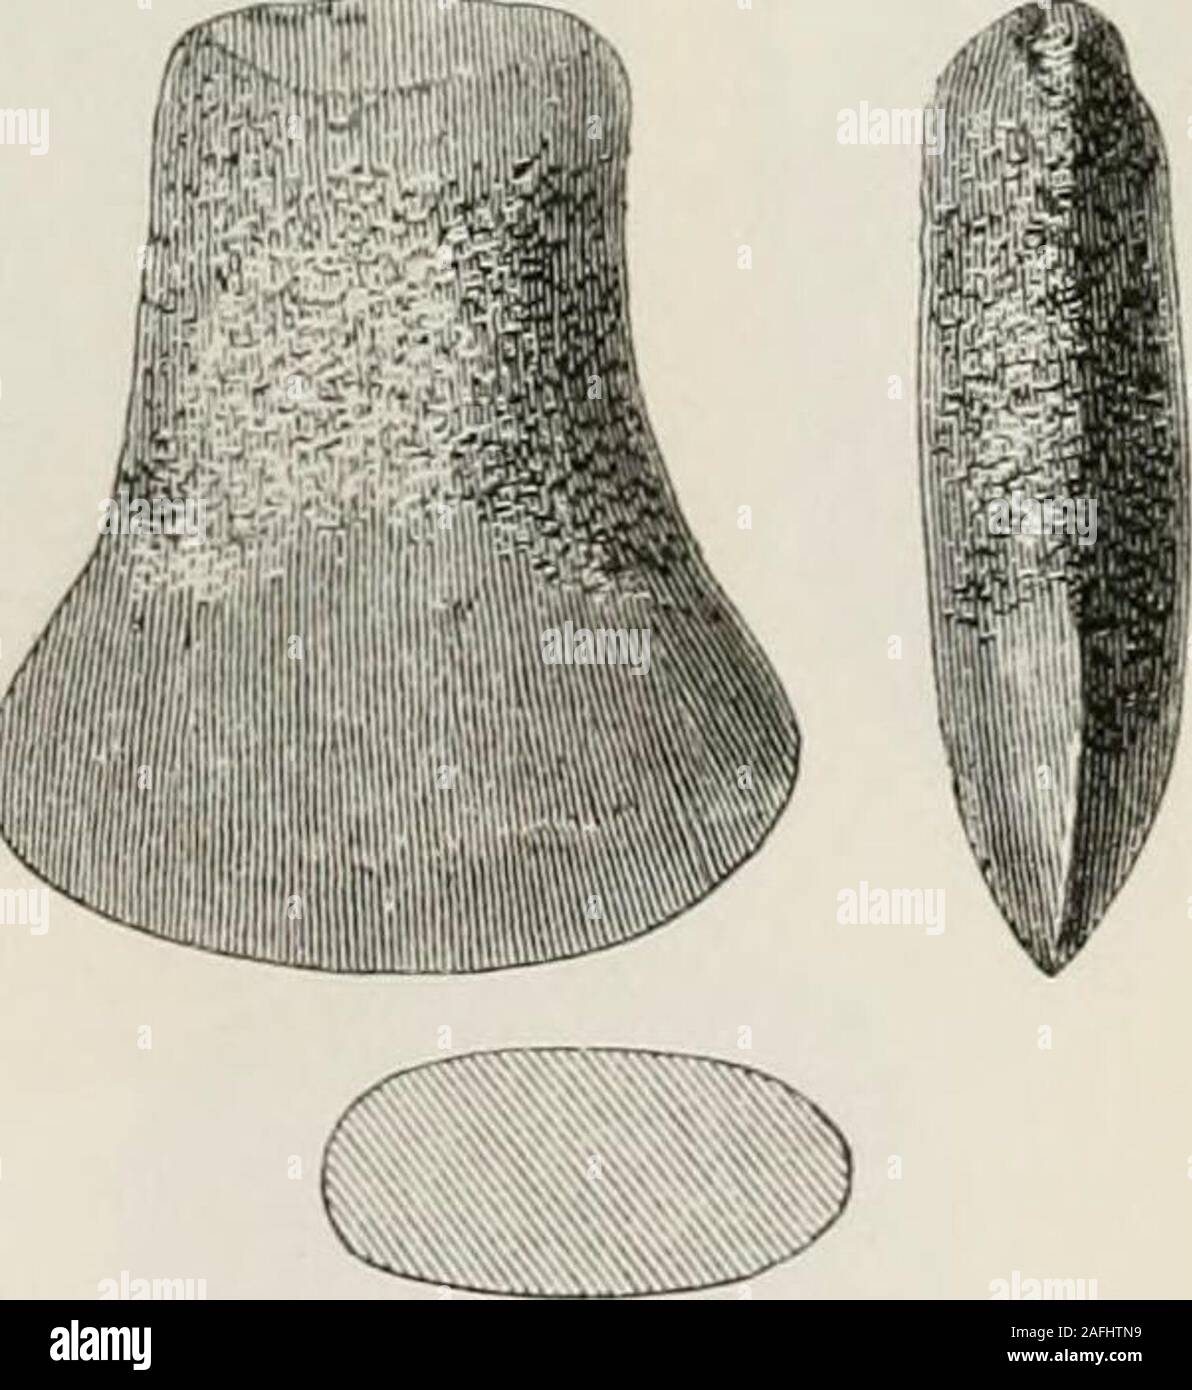 . The ancient stone implements, weapons, and ornaments, of Great Britain. -Near Cutteiiliaiu.. pin Fi|,r. 81.âNear Malton to assist in securing * Jan. 7, 1868. See also Reliquary, voL viii. p. 184.t Schoolcraft, Ind. Tribes, vol. ii., pi. xliv. 124 POLISHED CELTS. [chap. VI. Another form, with the blade reduced in width for about half its length,so as to form a sort of tang, is engraved by Squier and Davis.* The celt engraved in Fig. 82 pre-sents an abrupt shoulder on oneside only, which, however, is in thiscase probably due to the form ofthe pebble from which it was made,a portion of which ha Stock Photo